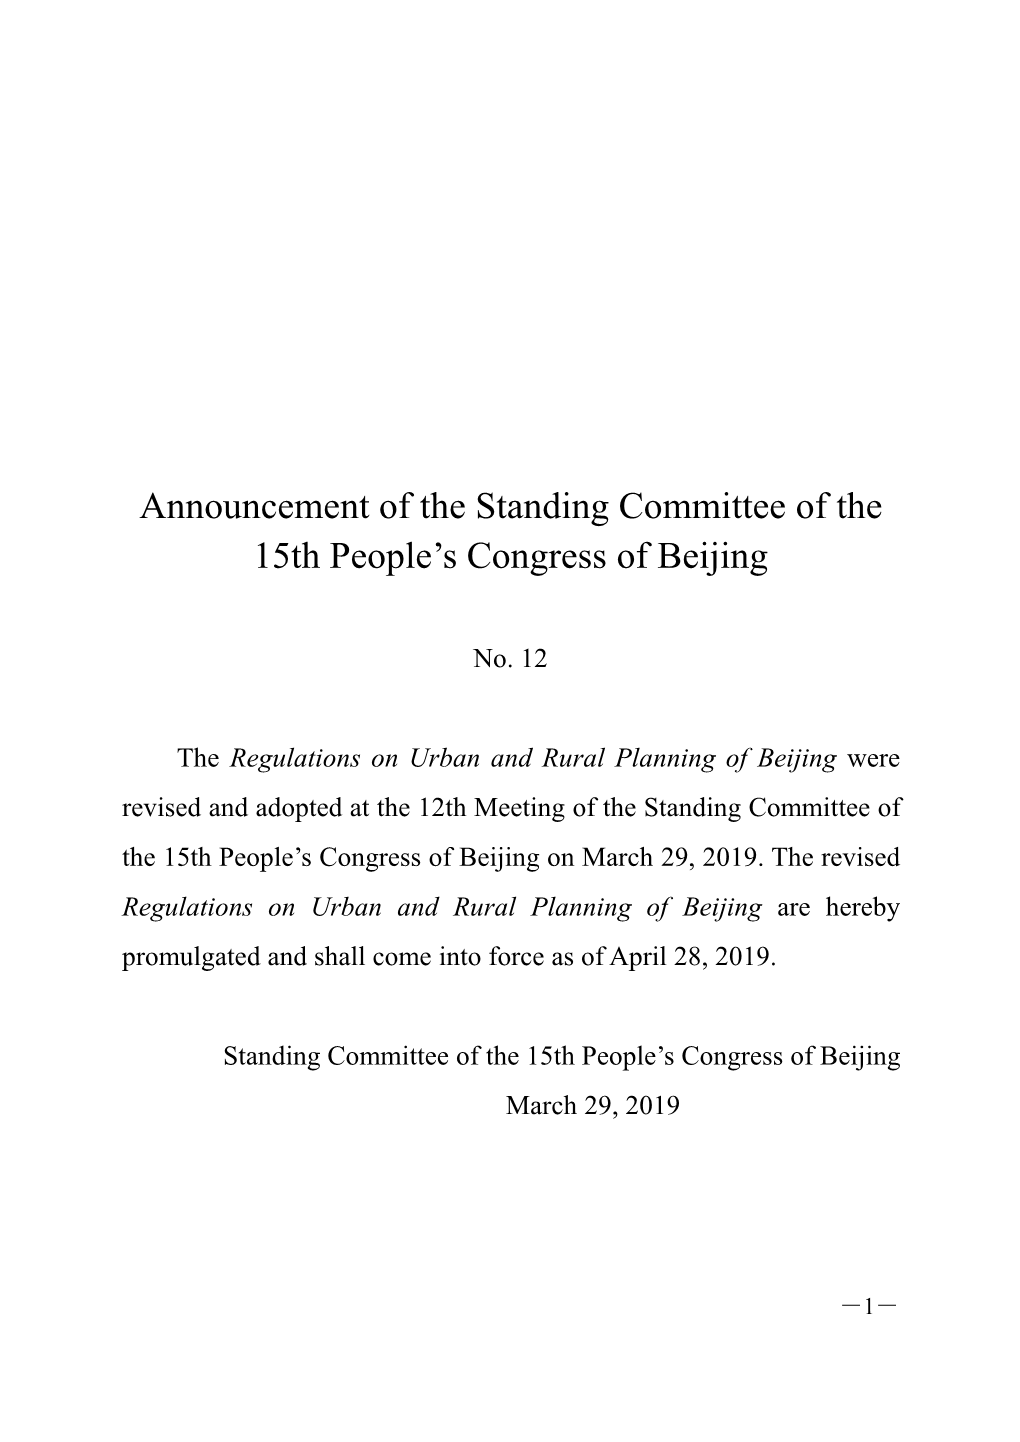 Announcement No.12-Regulations on Urban and Rural Planning of Beijing